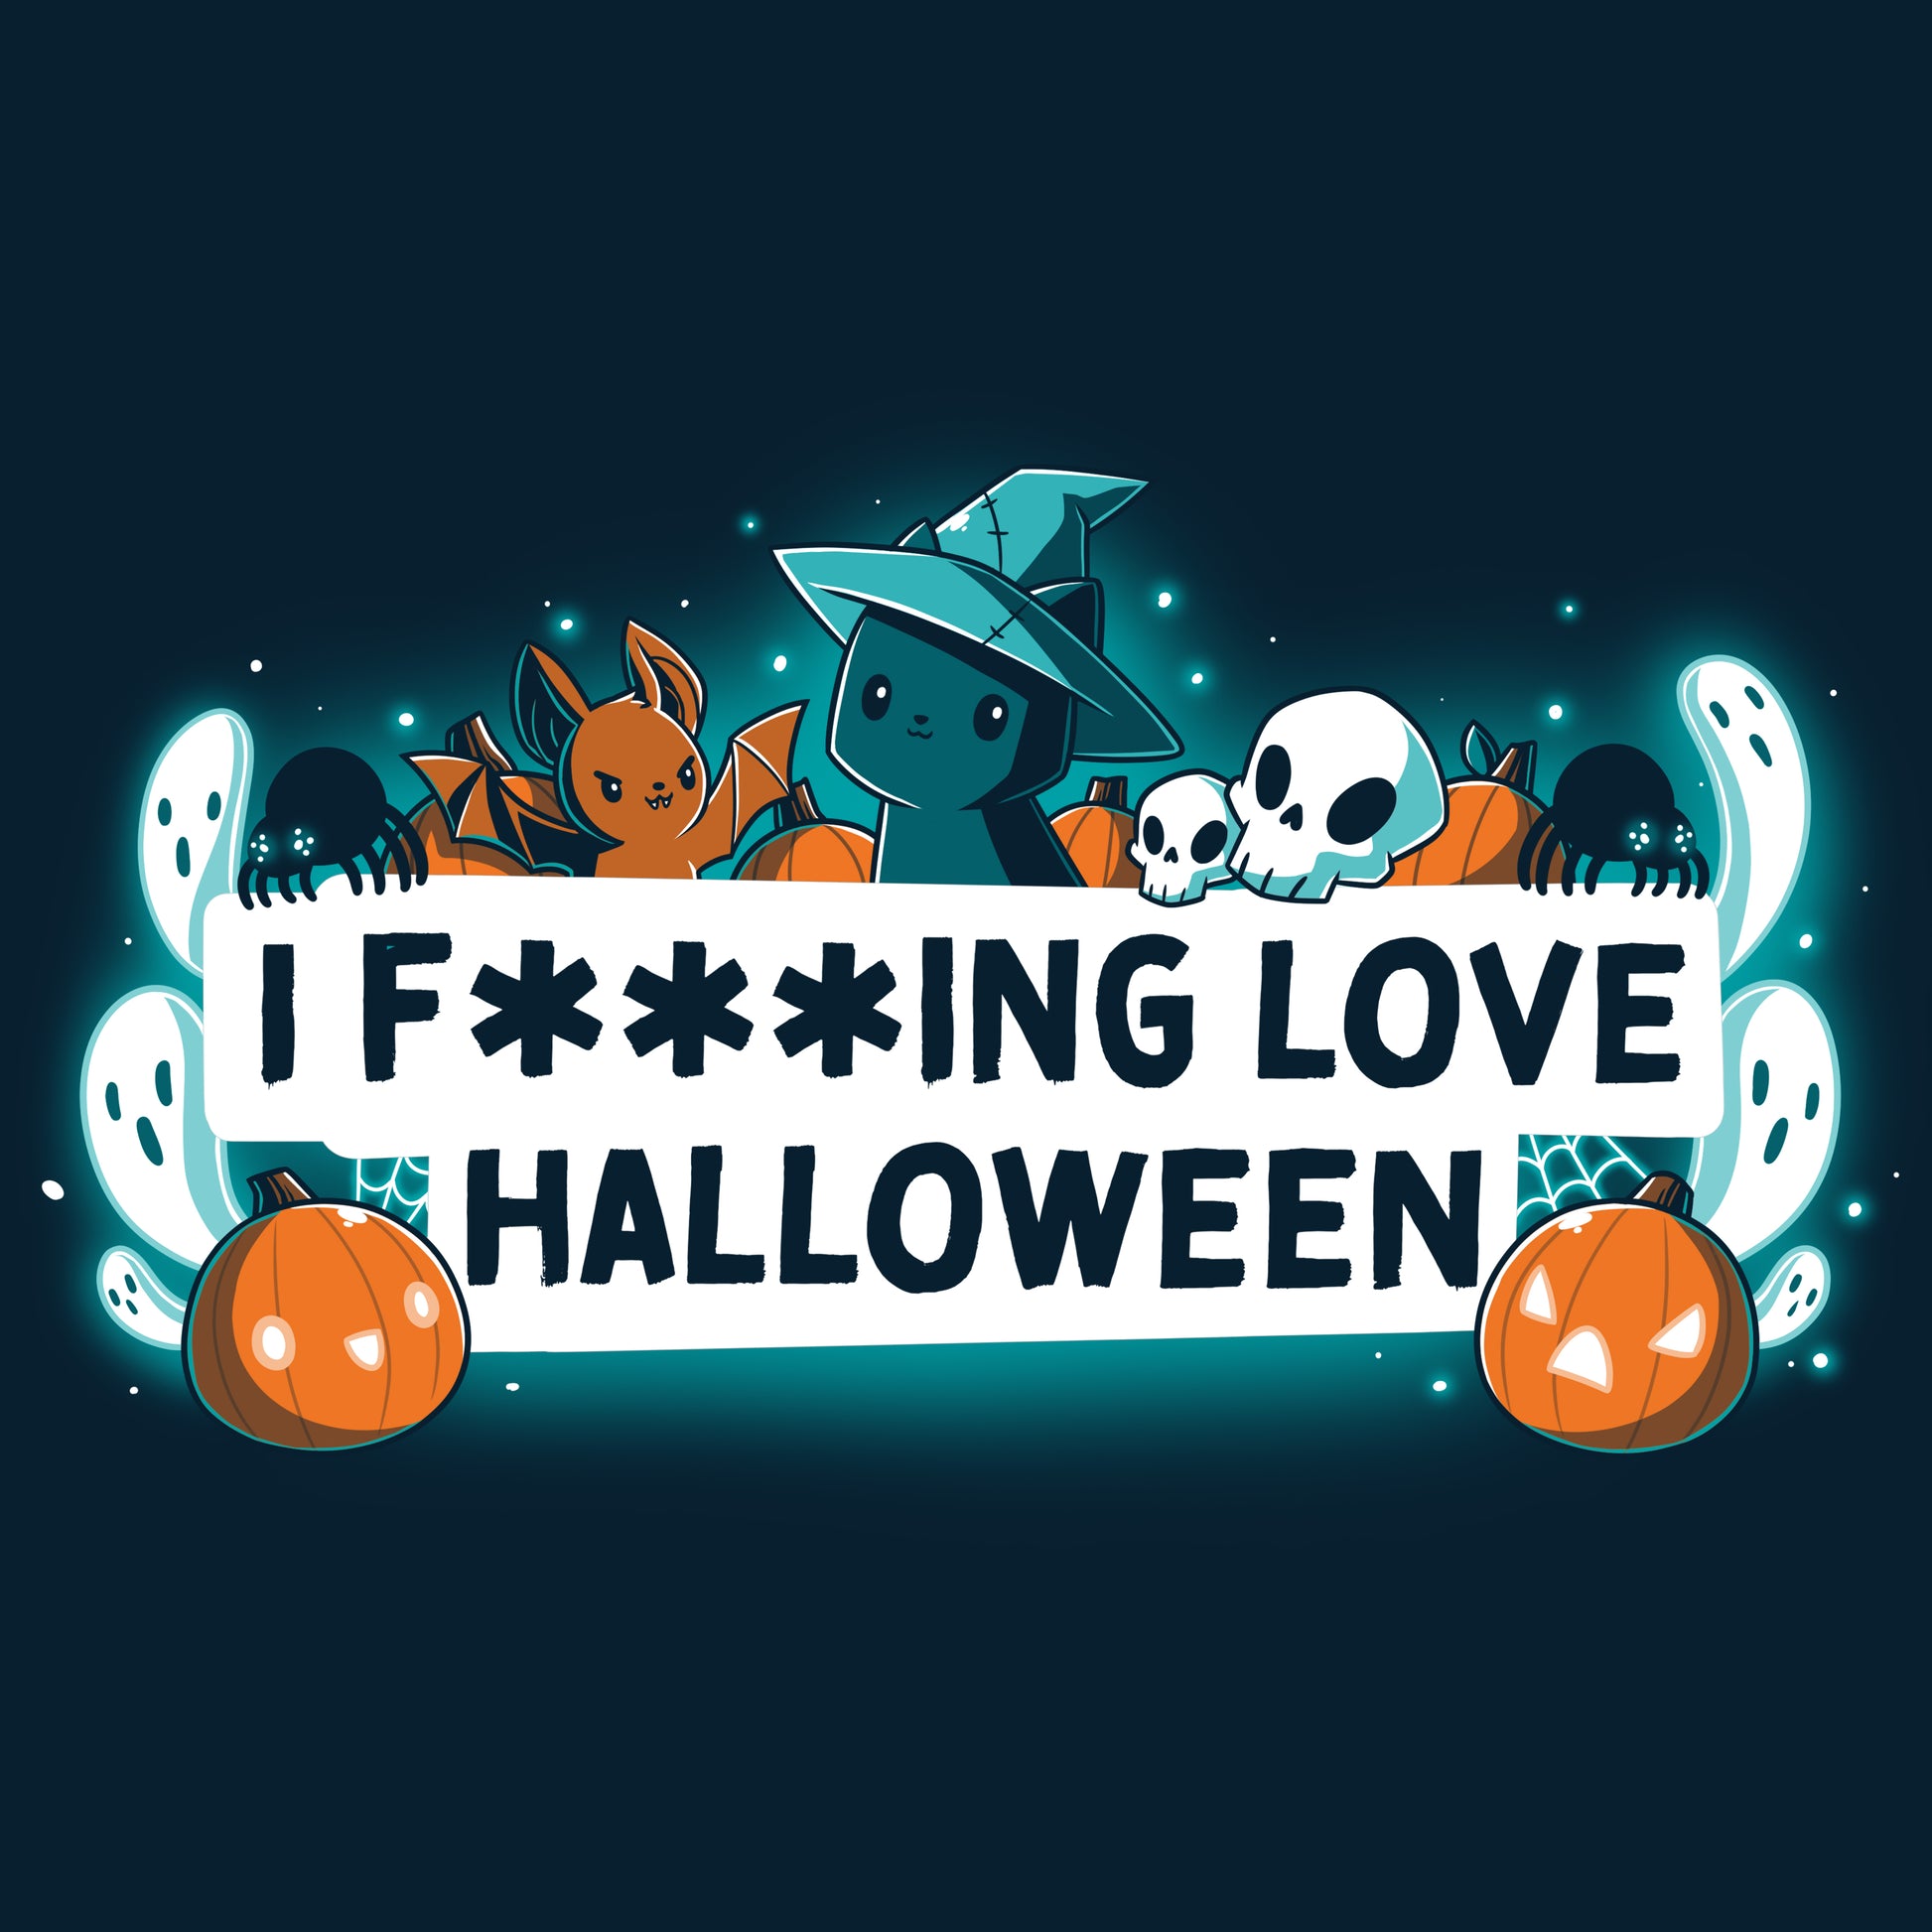 I absolutely adore I F***ing Love Halloween pumpkins during Halloween. (Brand: TeeTurtle)